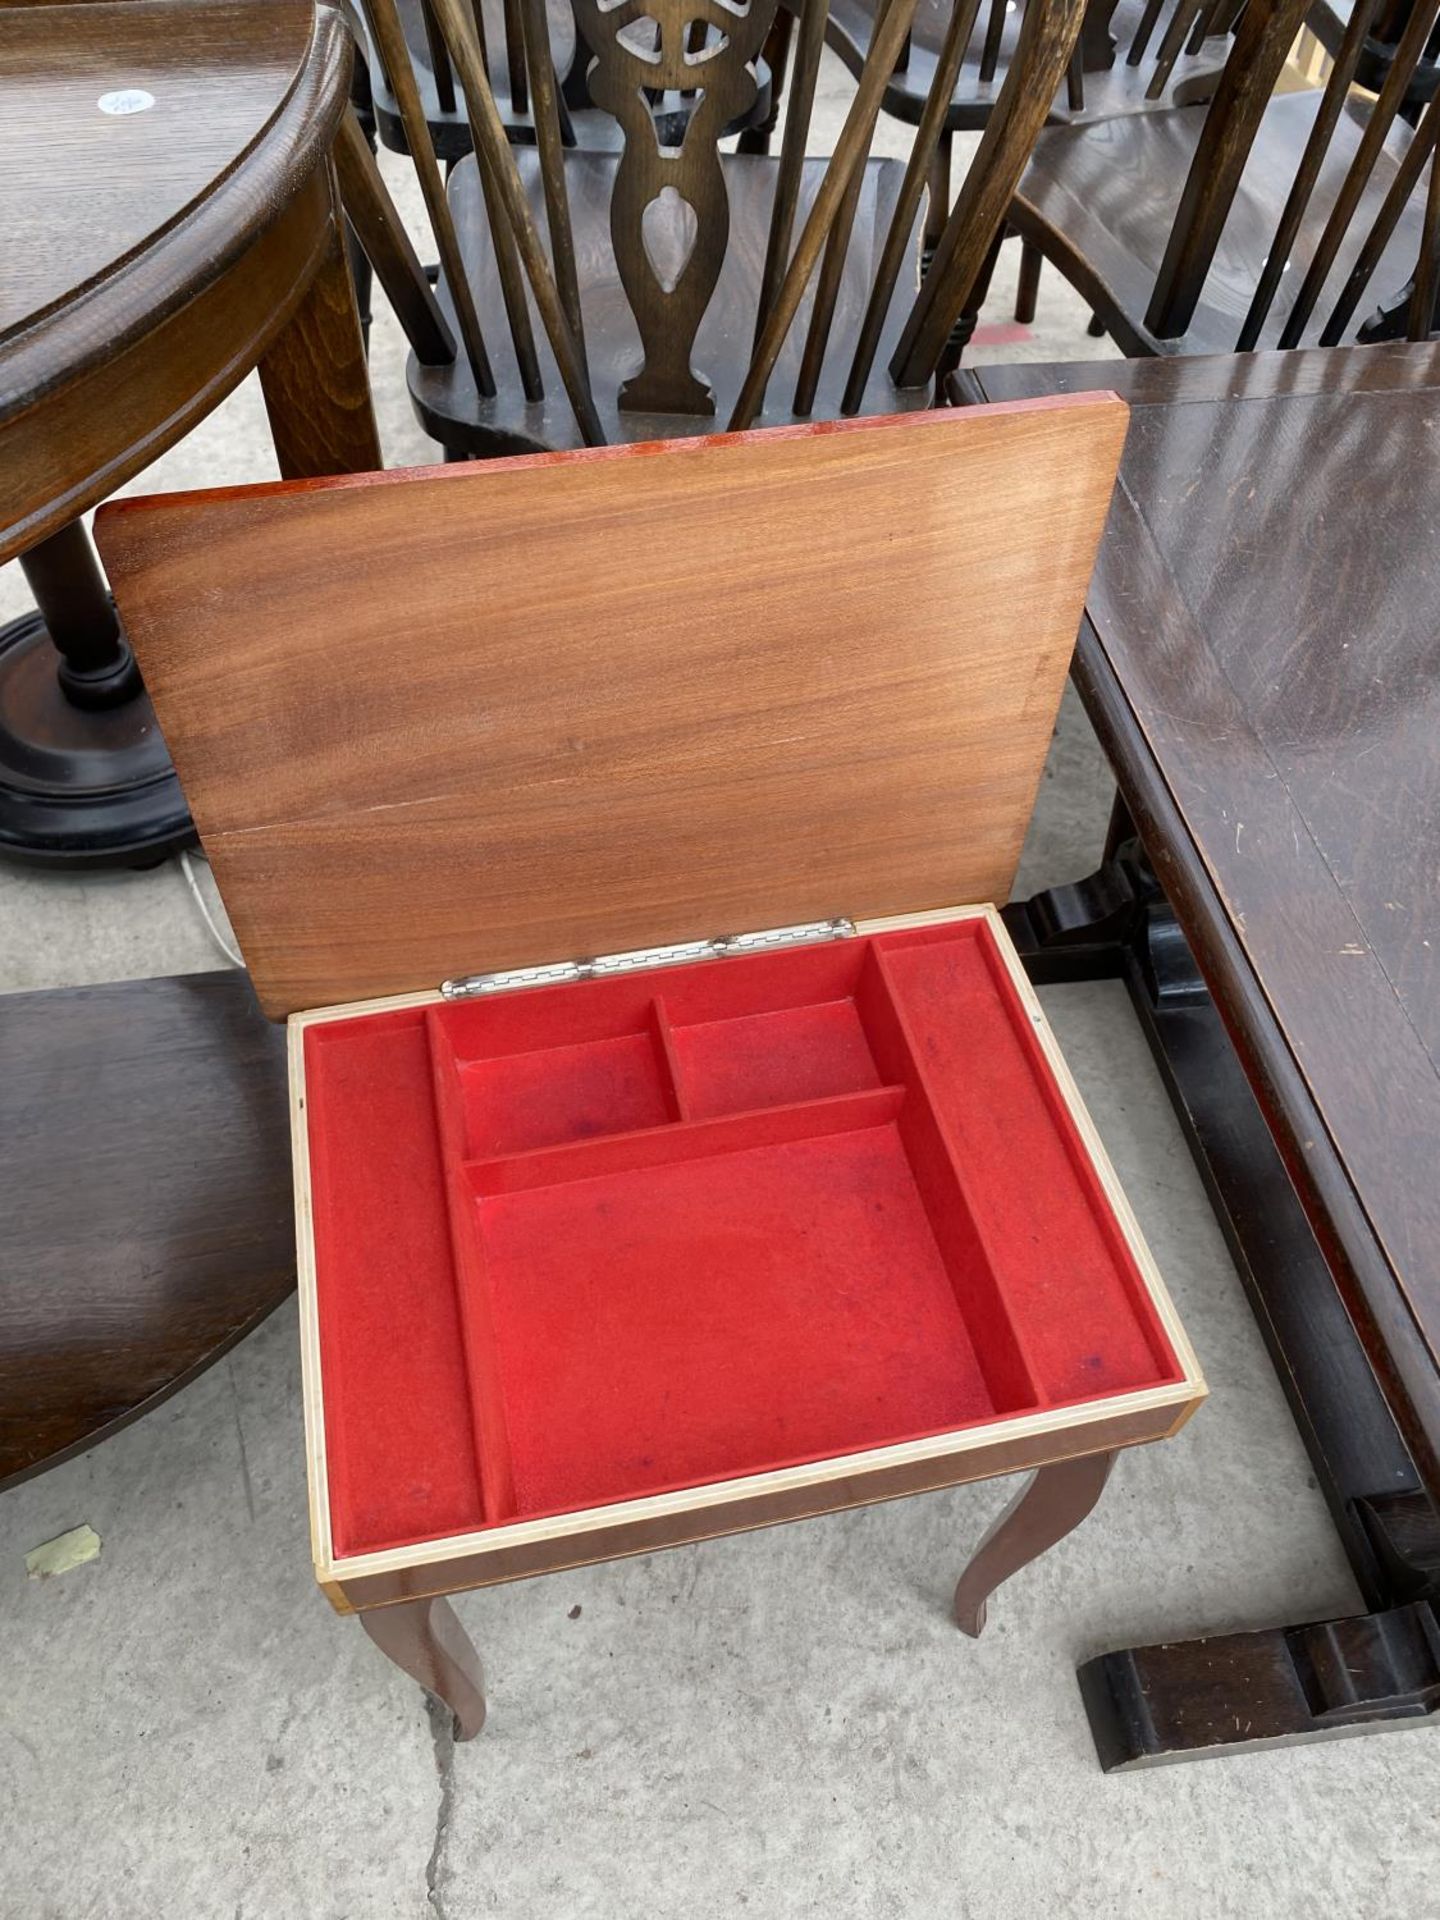 AN ITALIAN INLAID MAHOGANY SEWING TABLE WITH HINGED TOP AND A MAHOGANY COFFEE TABLE - Image 3 of 5